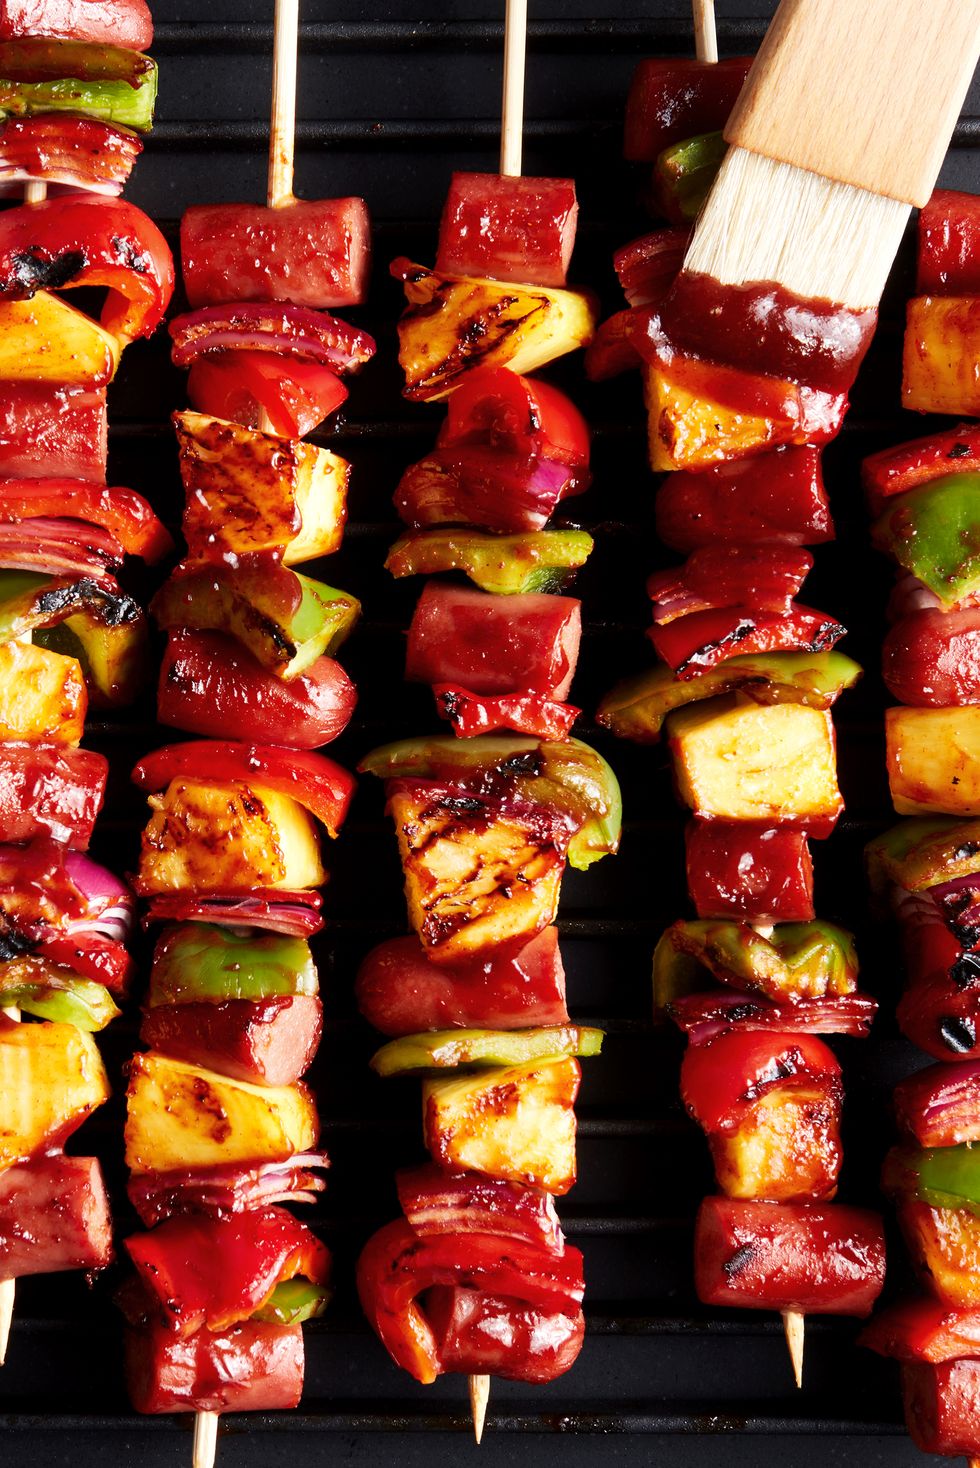 grilled skewers with sliced hot dogs, pineapple, red bell peppers basted with a bbq sauce